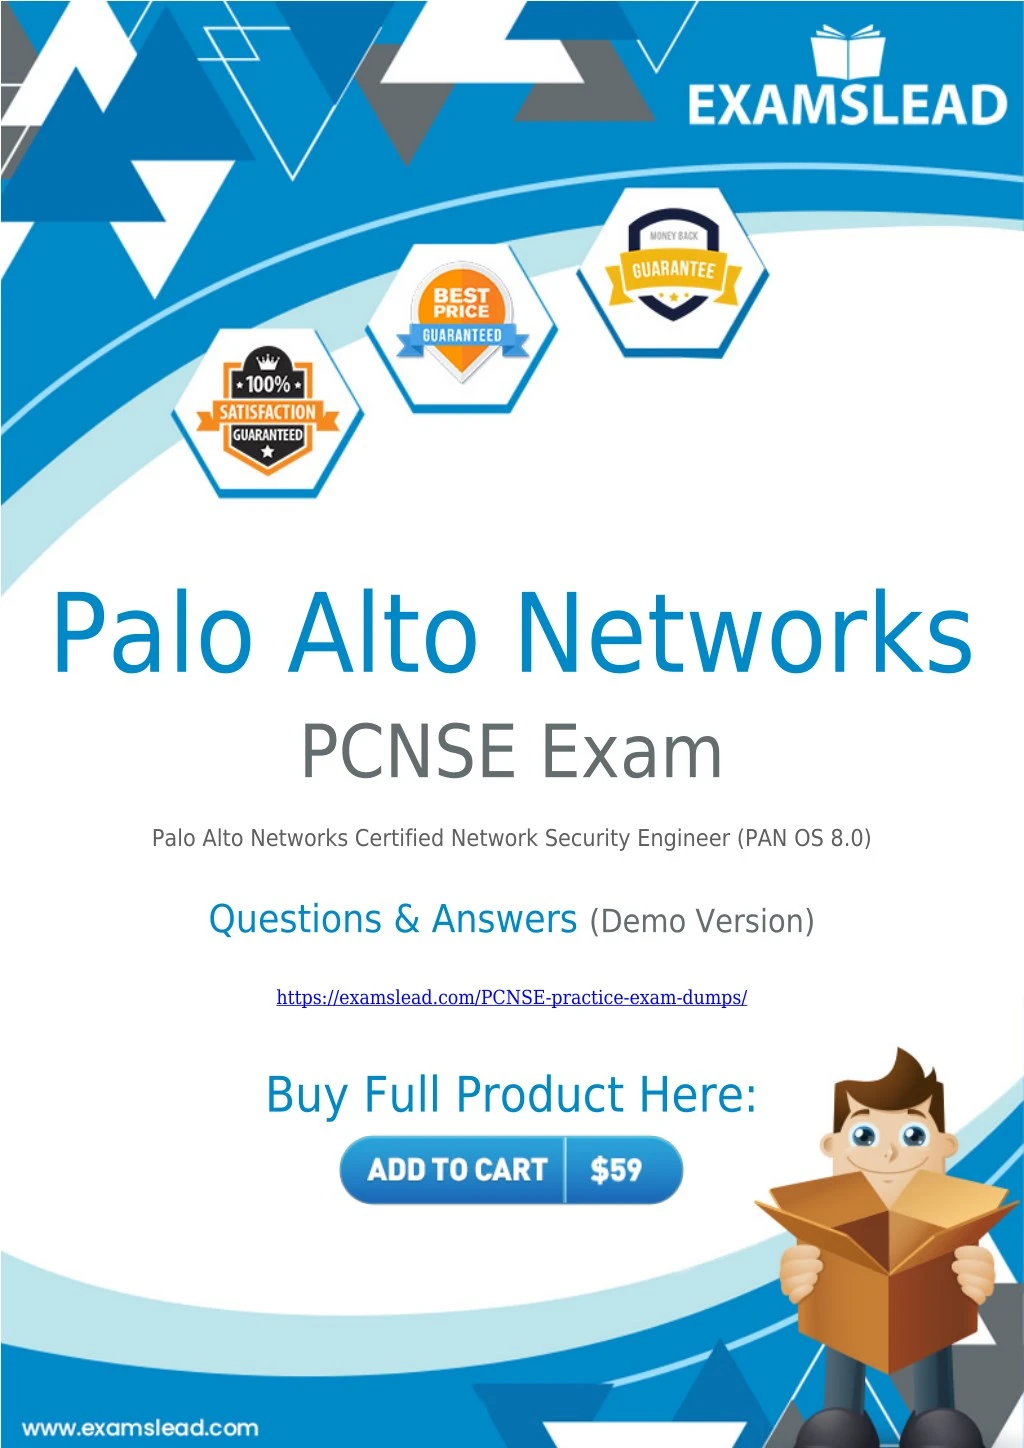 PCNSE Exam Dumps Collection